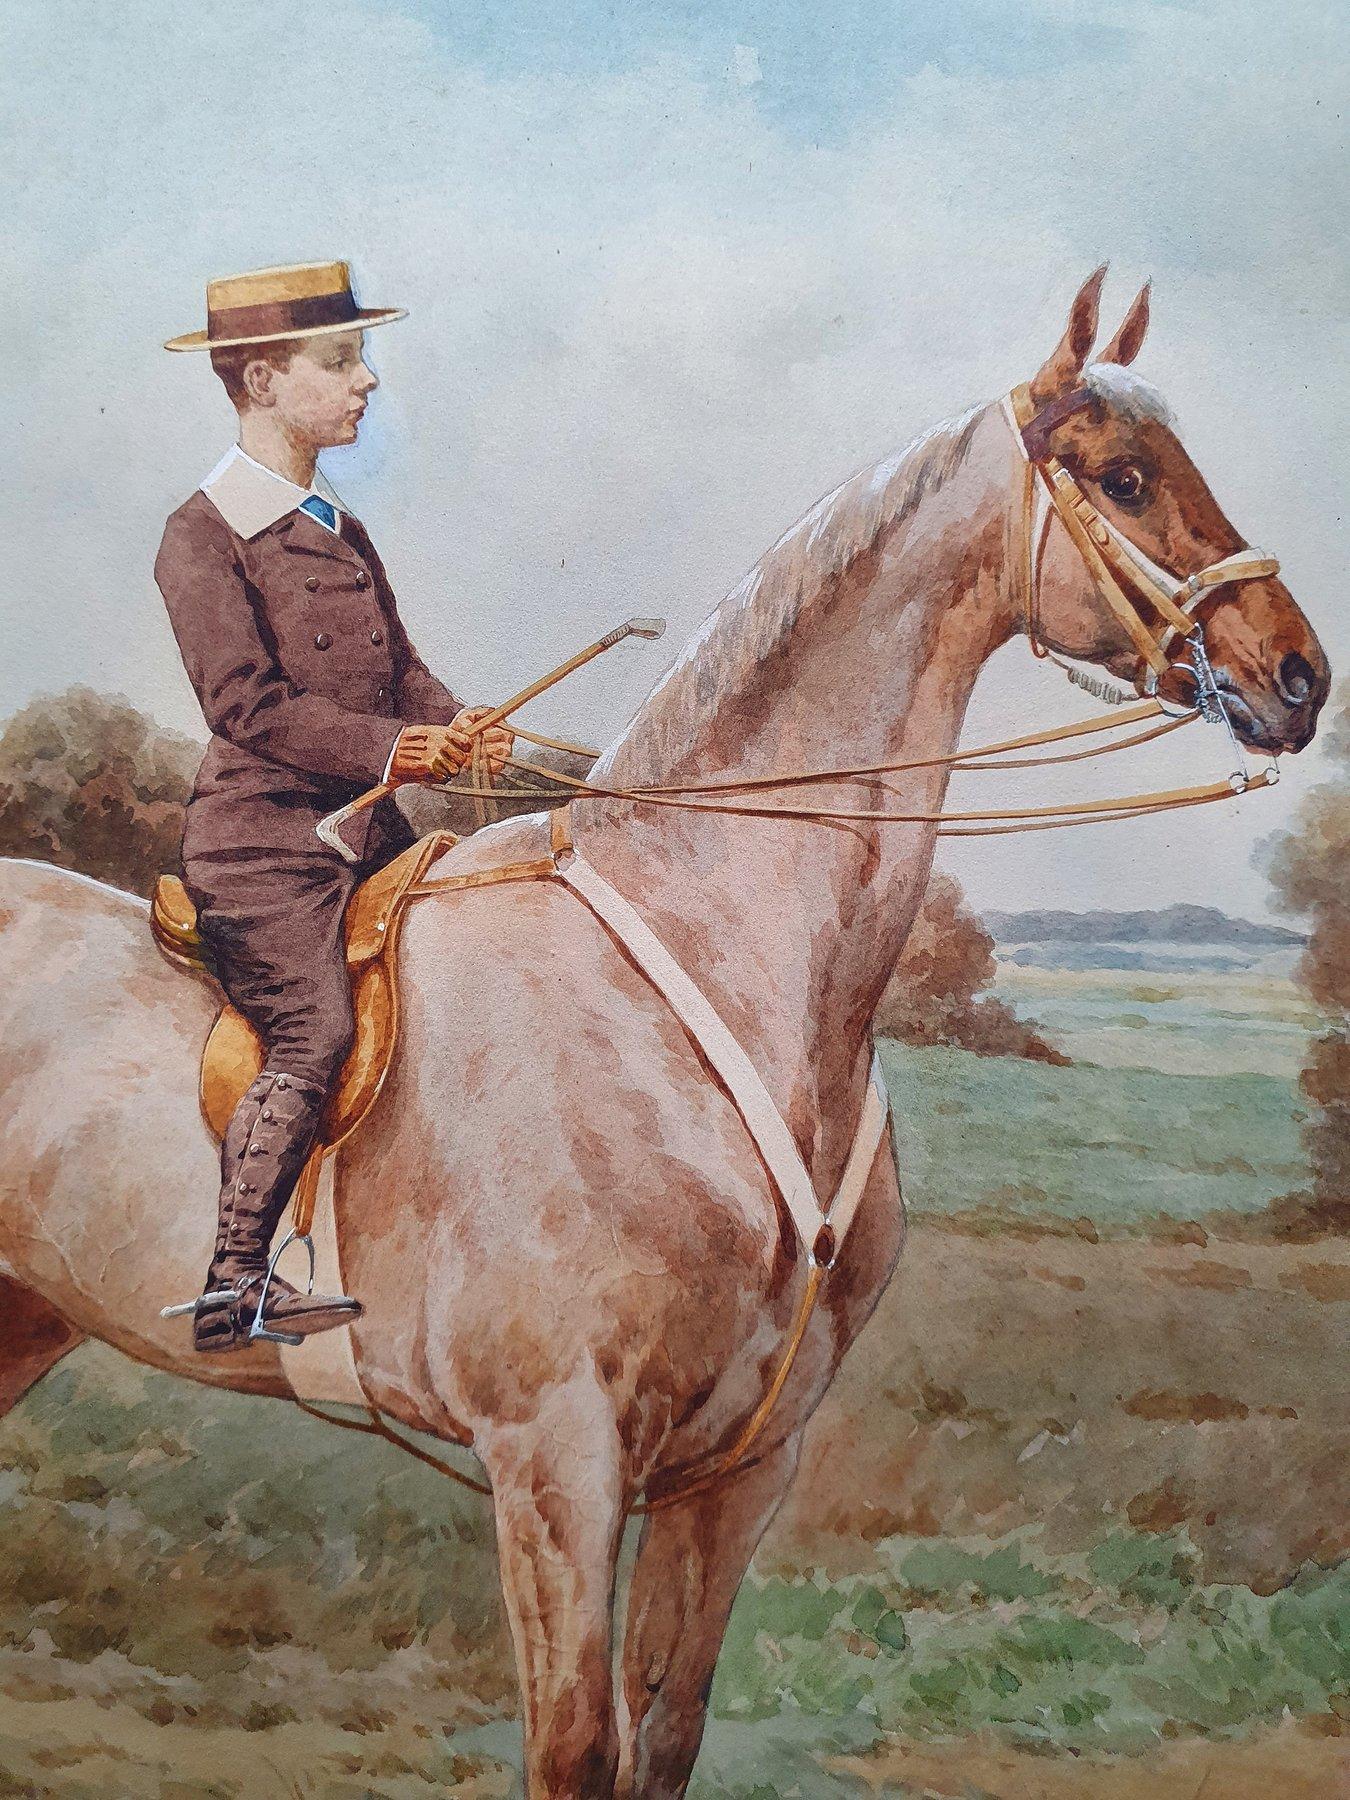 Teenager on horseback in summer landscape, Equestrian, late 19th century - Art by Charles Fernand de Condamy